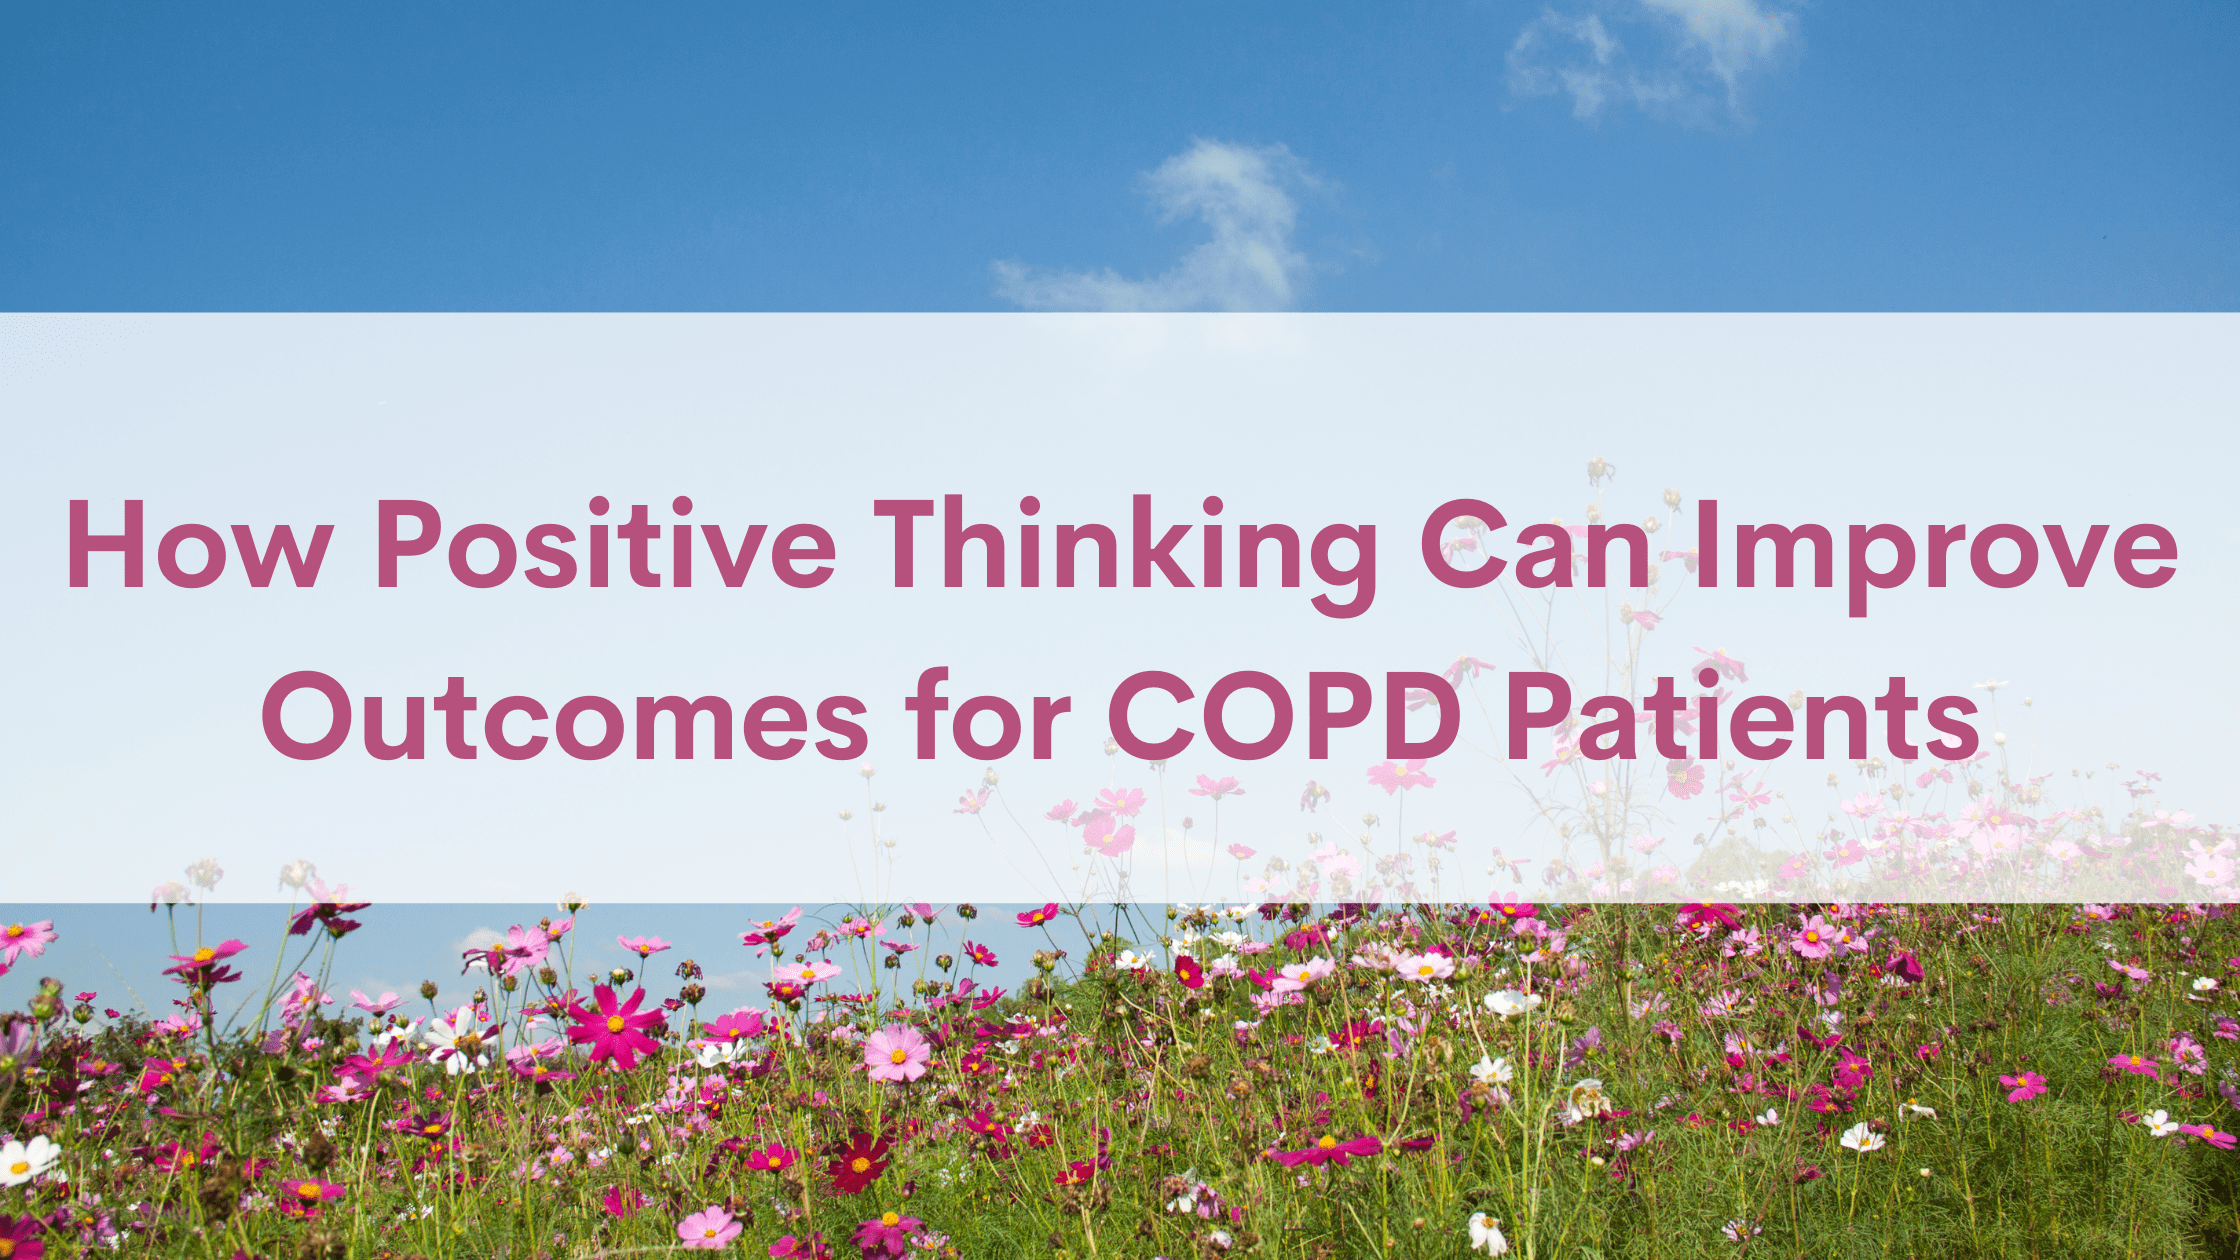 How Positive Thinking Can Improve Outcomes for COPD Patients